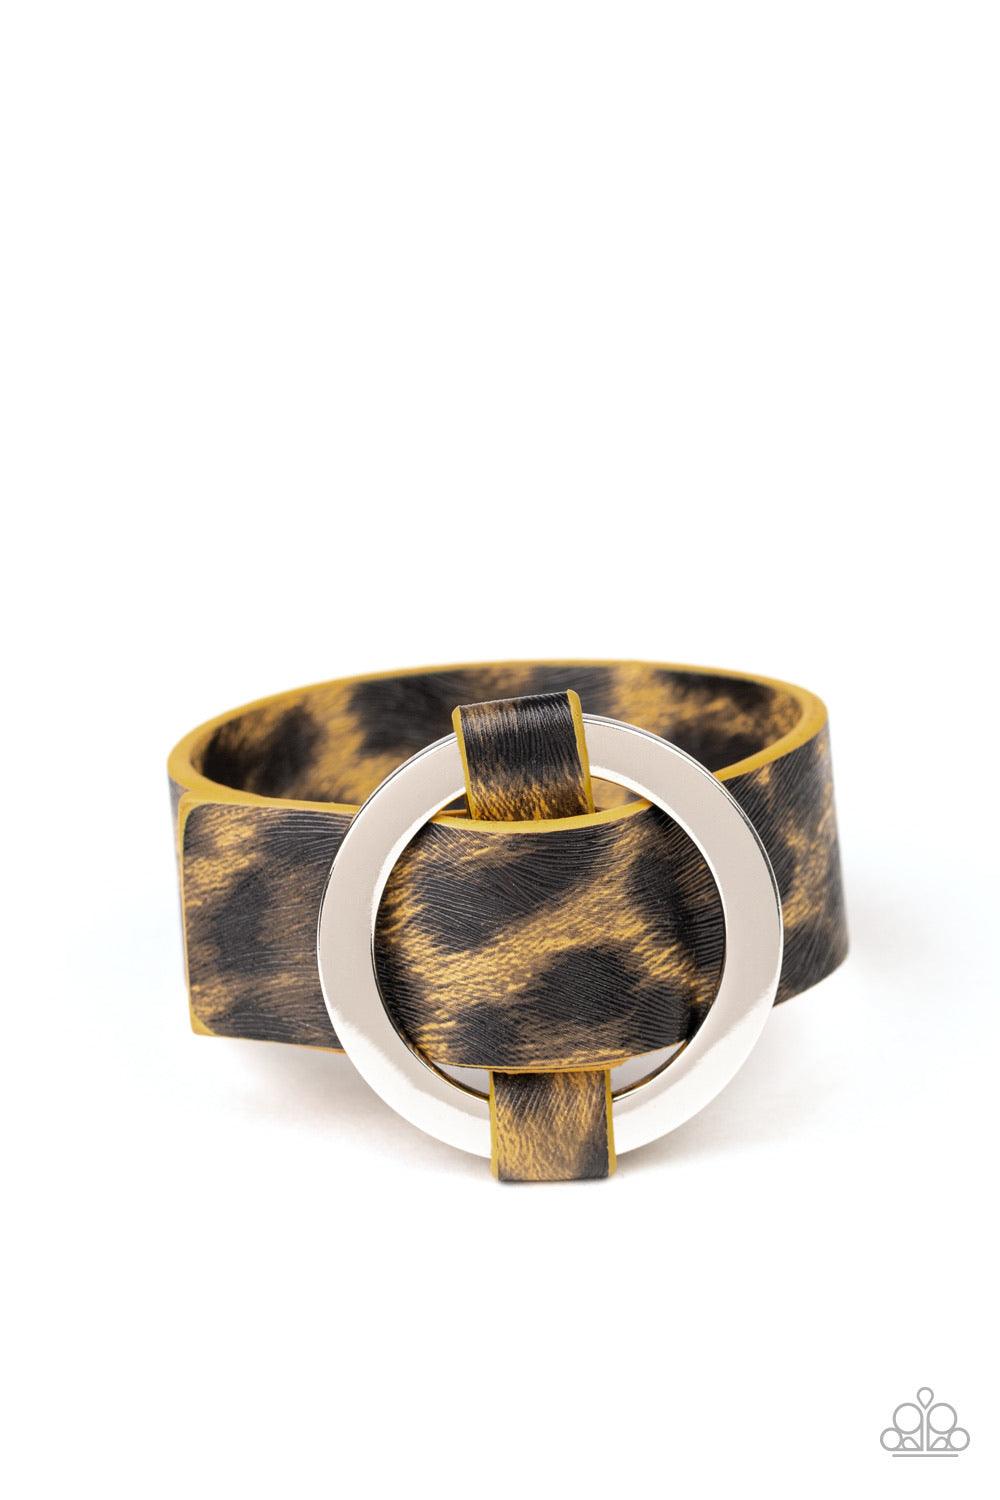 Paparazzi Accessories Jungle Cat Couture - Yellow Featuring a shiny yellow cheetah pattern, a textured piece of leather loops through the center of a shimmery silver hoop for a sassy urban look. Features an adjustable belt loop closure. Jewelry